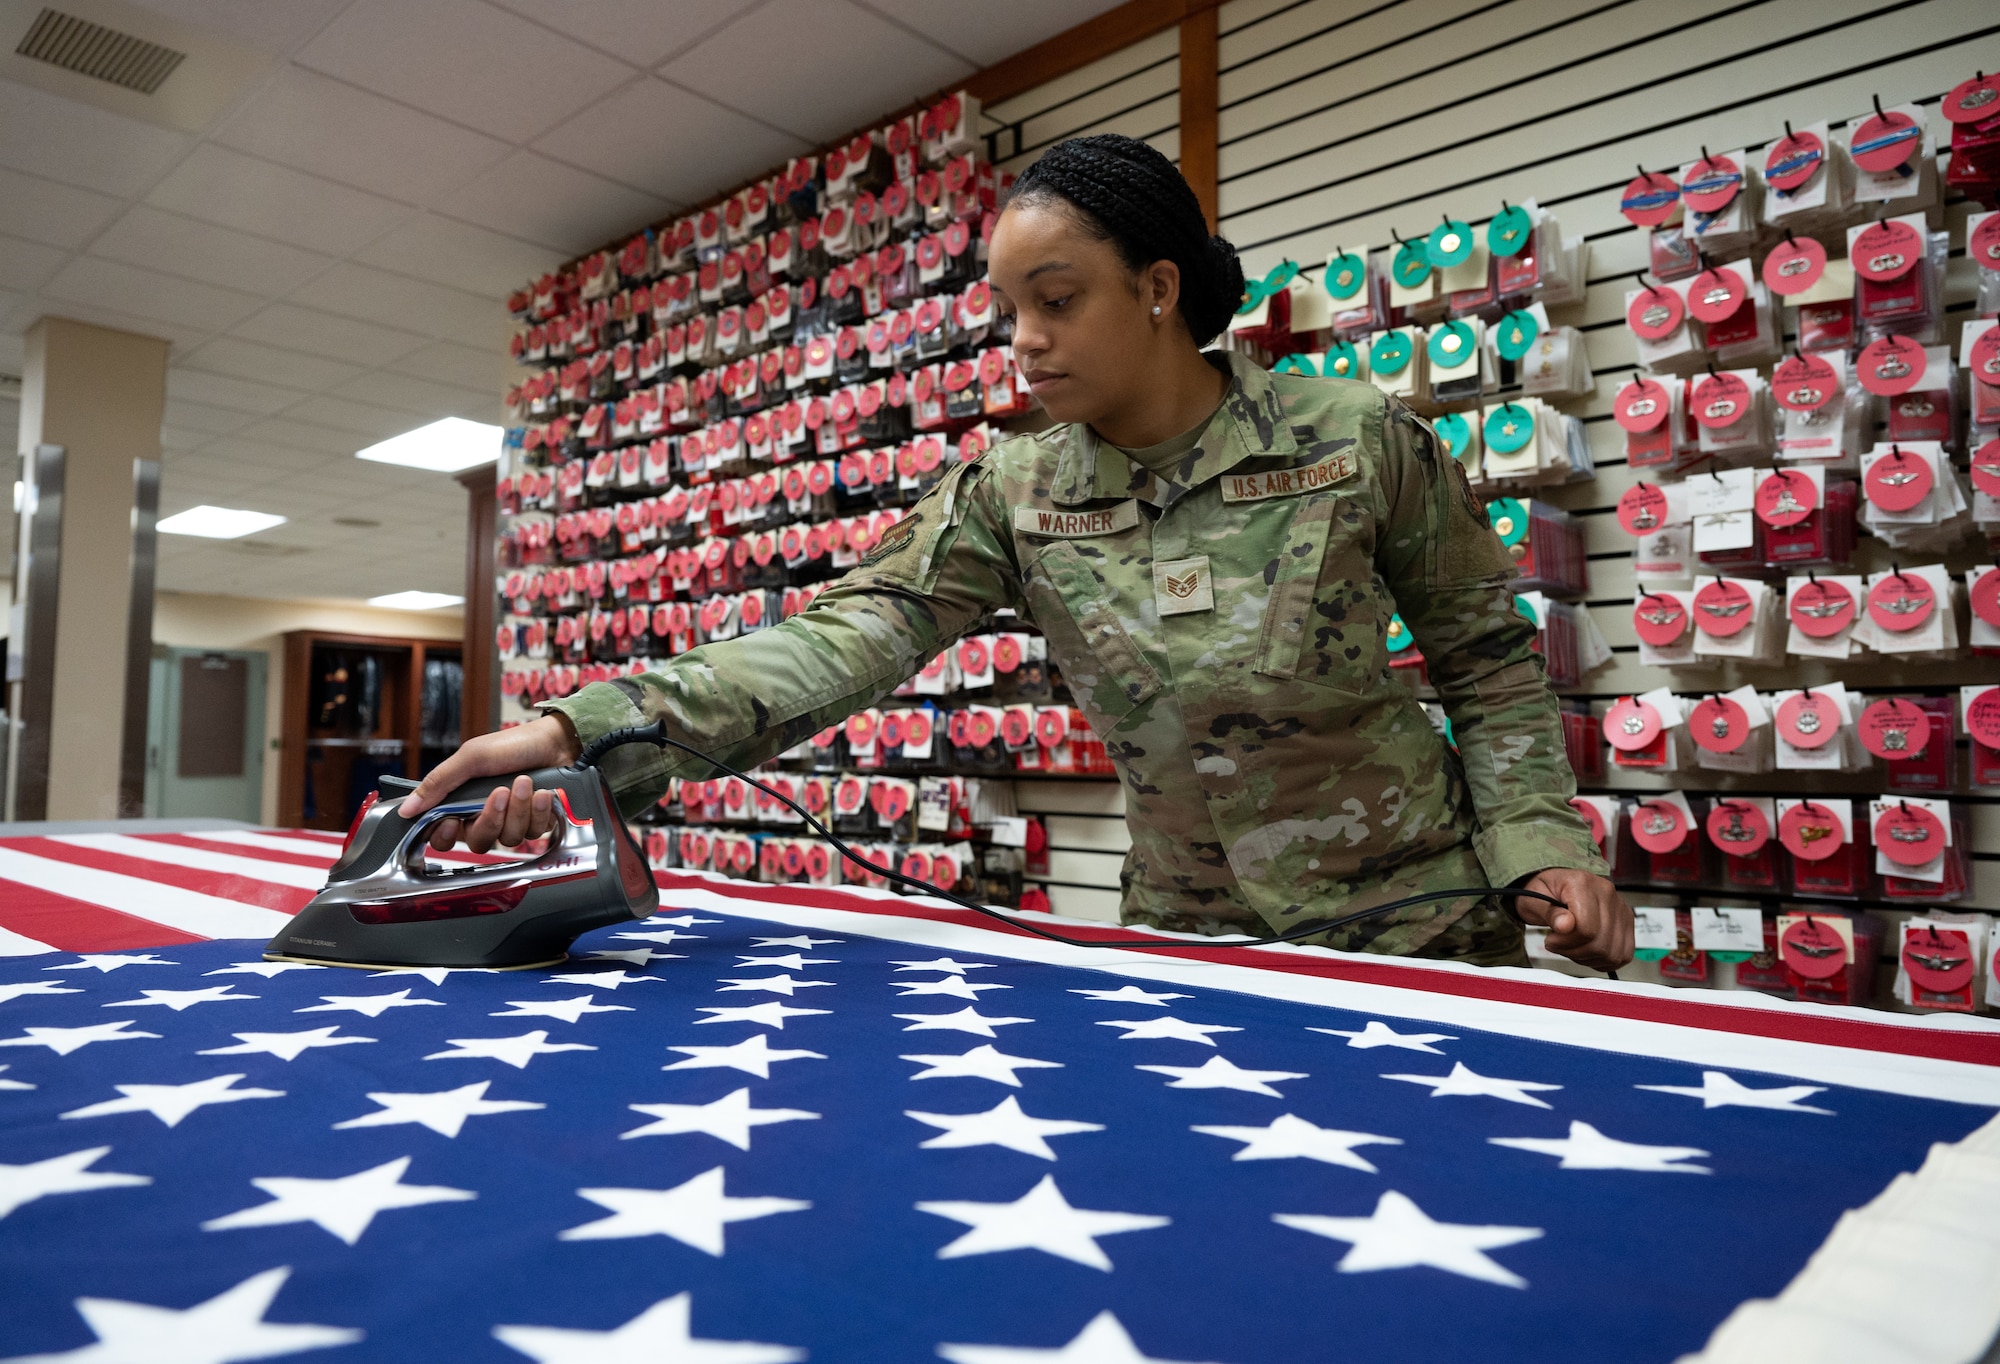 Staff Sgt. Zamiyah Warner, Air Force Mortuary Affairs Operations departures specialist, prepares a U.S. flag at Dover Air Force Base, Delaware, July 14, 2022. Flag preparation consists of ironing the flag, removing any lint and clipping strings. Warner is a reservist deployed to AFMAO from the 512th Memorial Affairs Squadron.  (U.S. Air Force photo by Jason Minto)